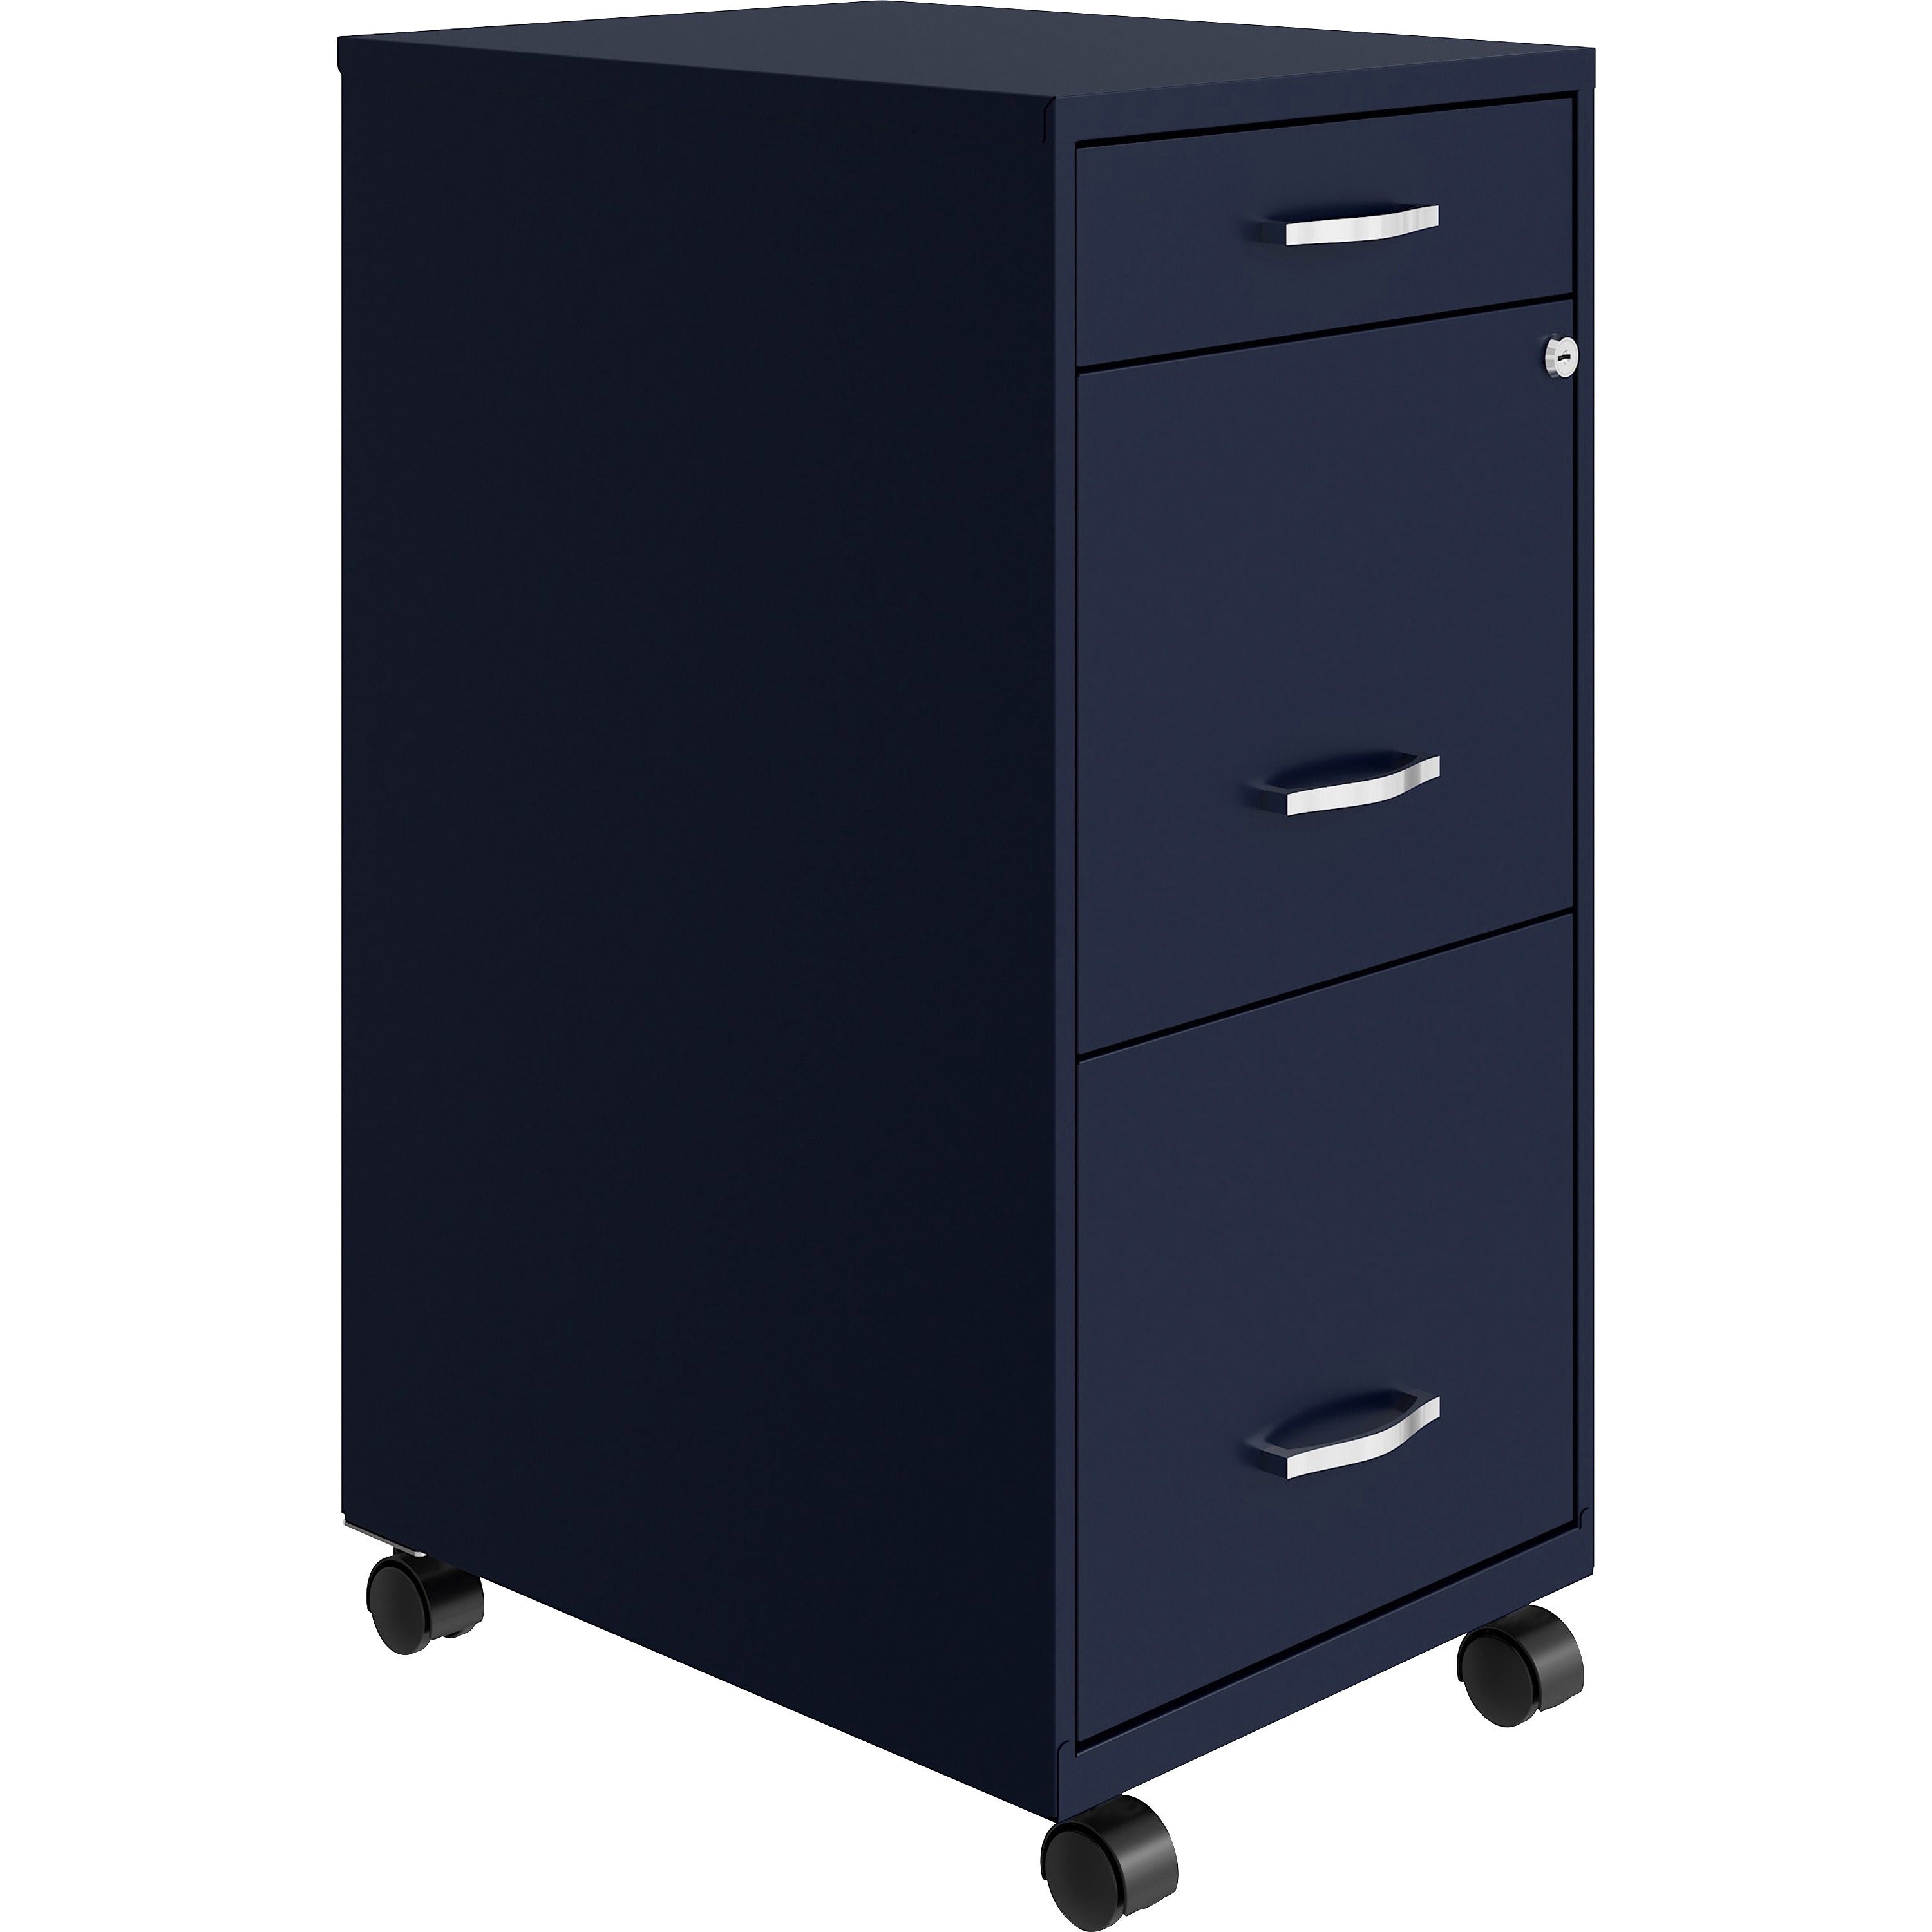 nusparc-mobile-file-cabinet-142-x-18-x-295-3-x-drawers-for-file-box-letter-mobility-locking-drawer-glide-suspension-3-4-drawer-extension-cam-lock-nonporous-surface-blue-painted-steel-recycled_nprvf318bmny - 1